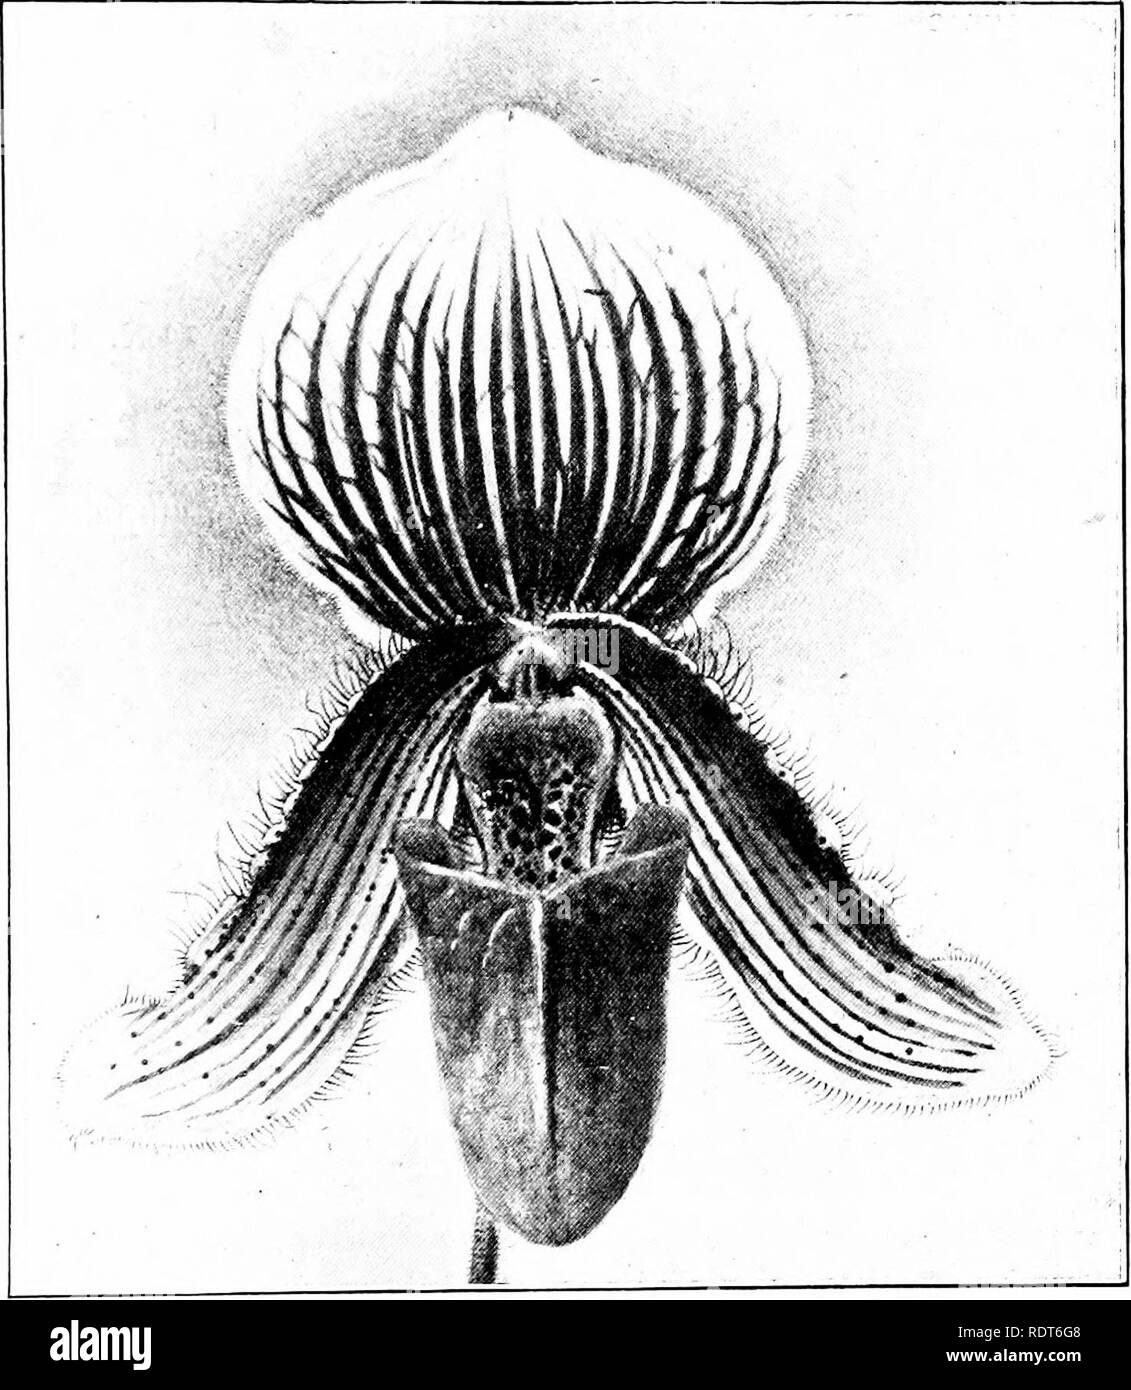 . The orchid stud-book: an enumeration of hybrid orchids of artificial origin, with their parents, raisers, date of first flowering, references to descriptions and figures, and synonymy. With an historical introduction and 120 figures and a chapter on hybridising and raising orchids from seed. Orchids. Part II.] THE ORCHID STUD-BOOK. 195 C. x James K. Polk, Amer. G. 1900, 200; Rep. Miss. Bot. G. 1900, 201. t. Roebling. C. x edgbastonense, G.C. 1902, i. 219; O.R. 1902, 117.— Latham. P. X elgbastonense, O.R. 1903, 95.—Latham. C. x Violetta, G.C. 1903, i. 302: O.R. 1903, 179.—Charlesworth. $69. P Stock Photo